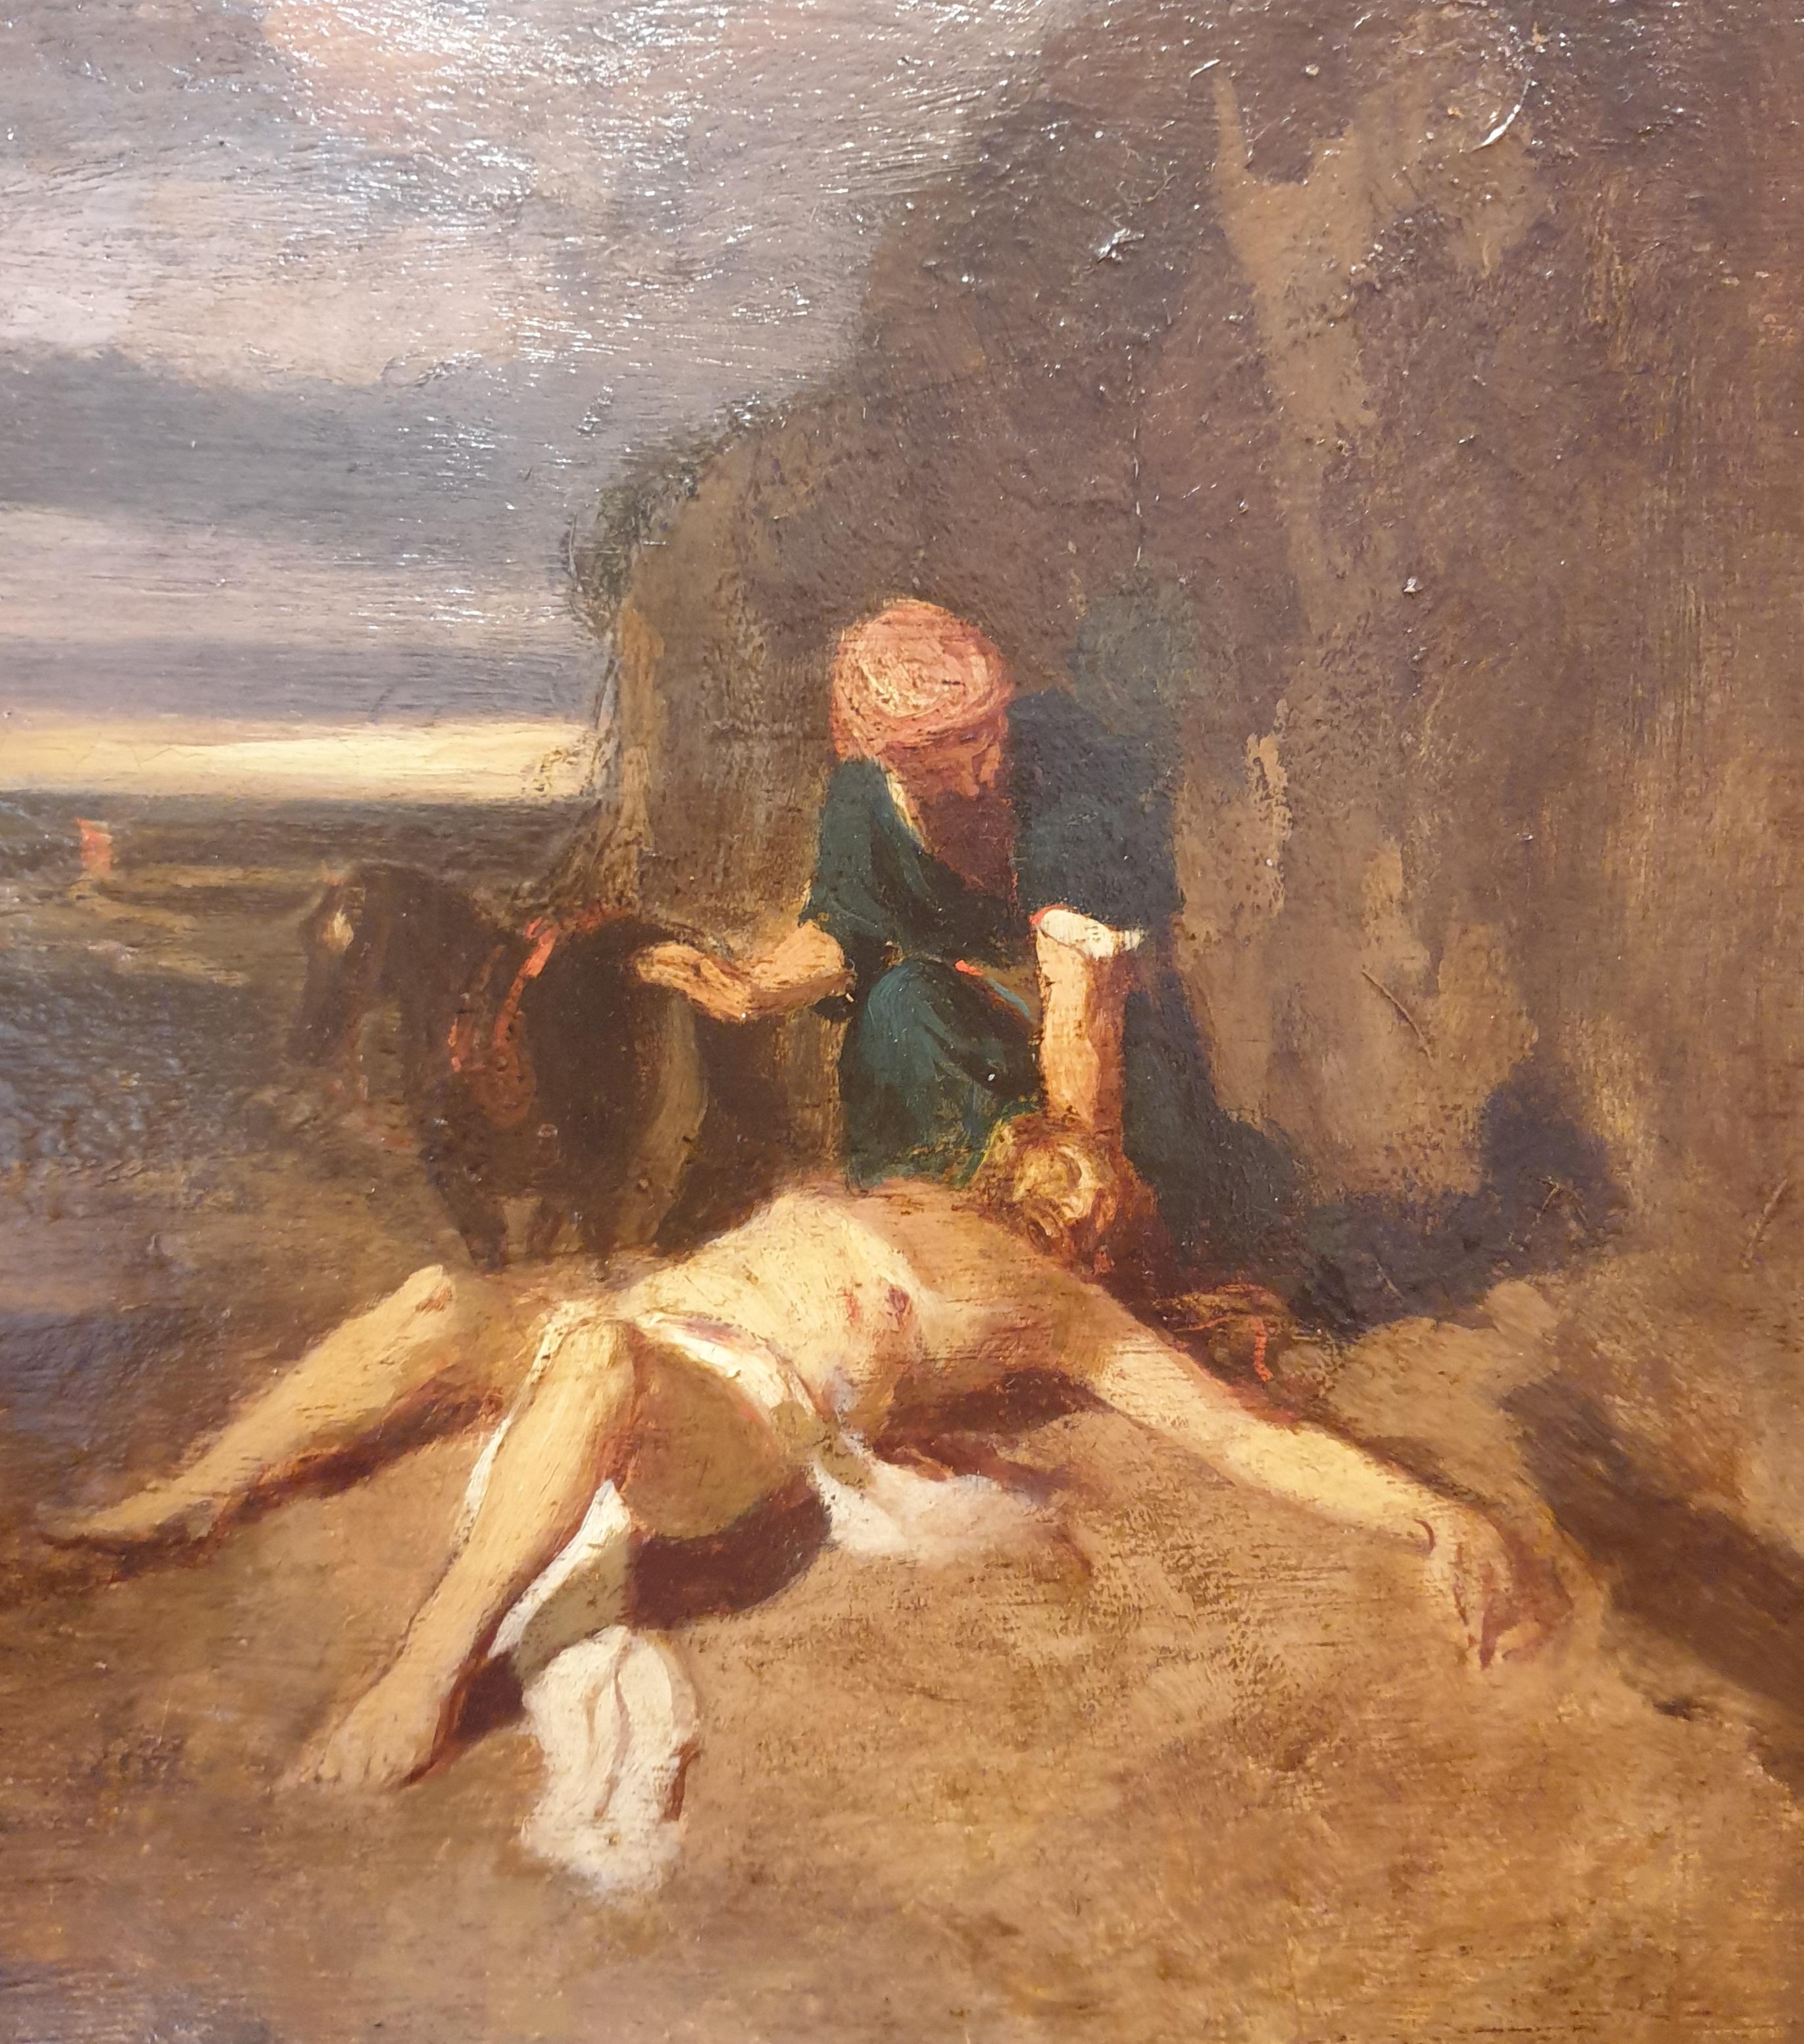 French school in the middle of the 19th century
Oil on wood
25 x 23.5 cm
Trace of a signature at bottom left 
This small study for the Good Samaritan recalls the art of French romantic painters from the mid-19th century such as Paul Huet and Eugène